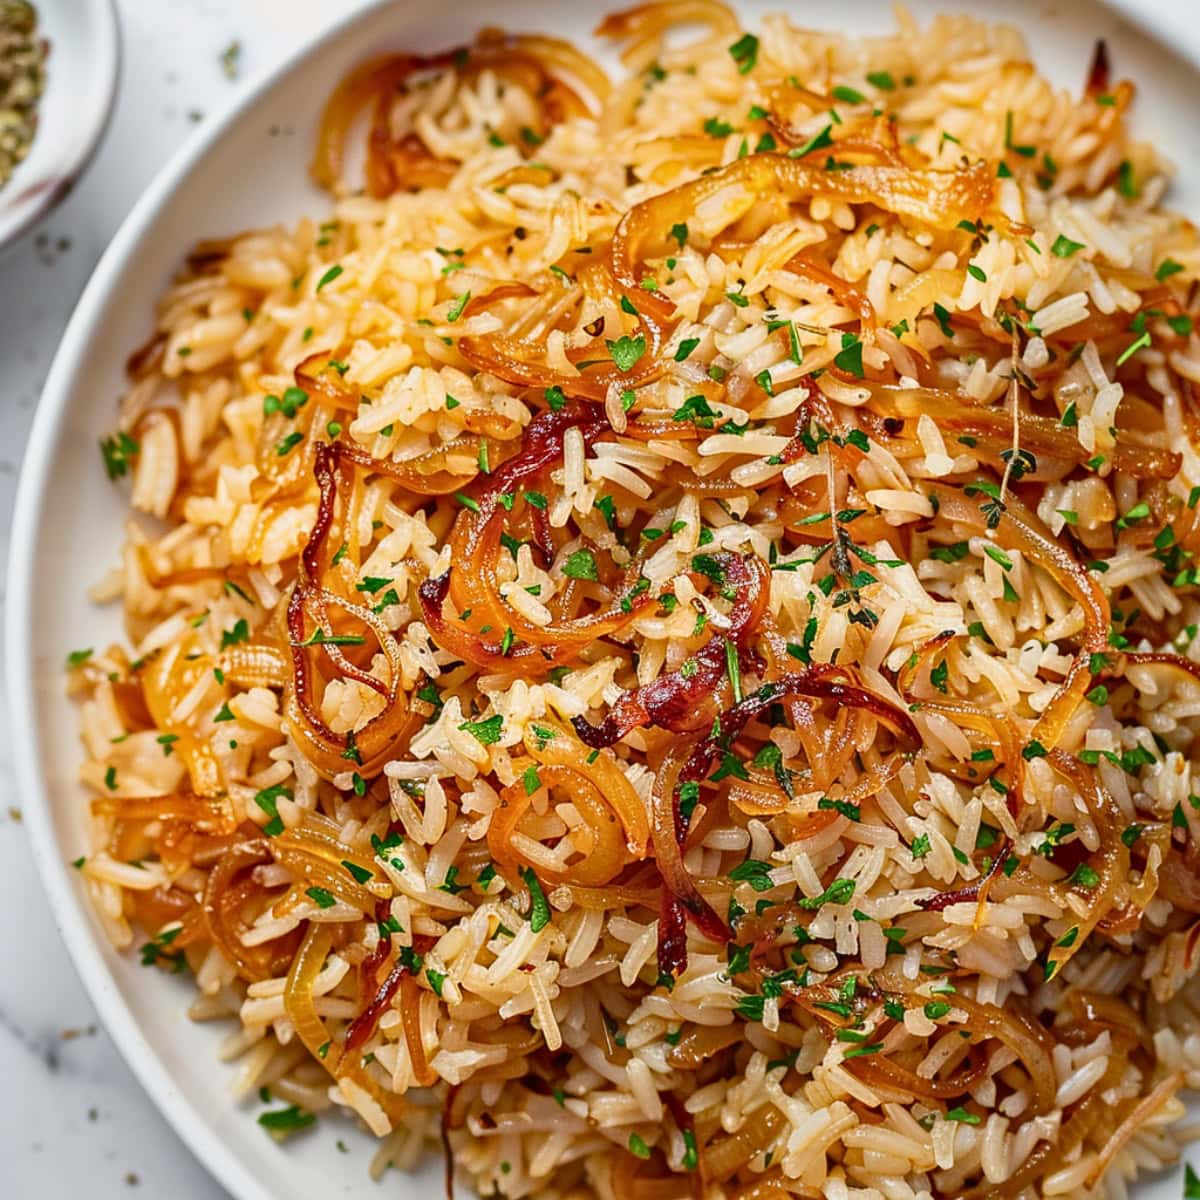 Rice with French onion served in a white plate.